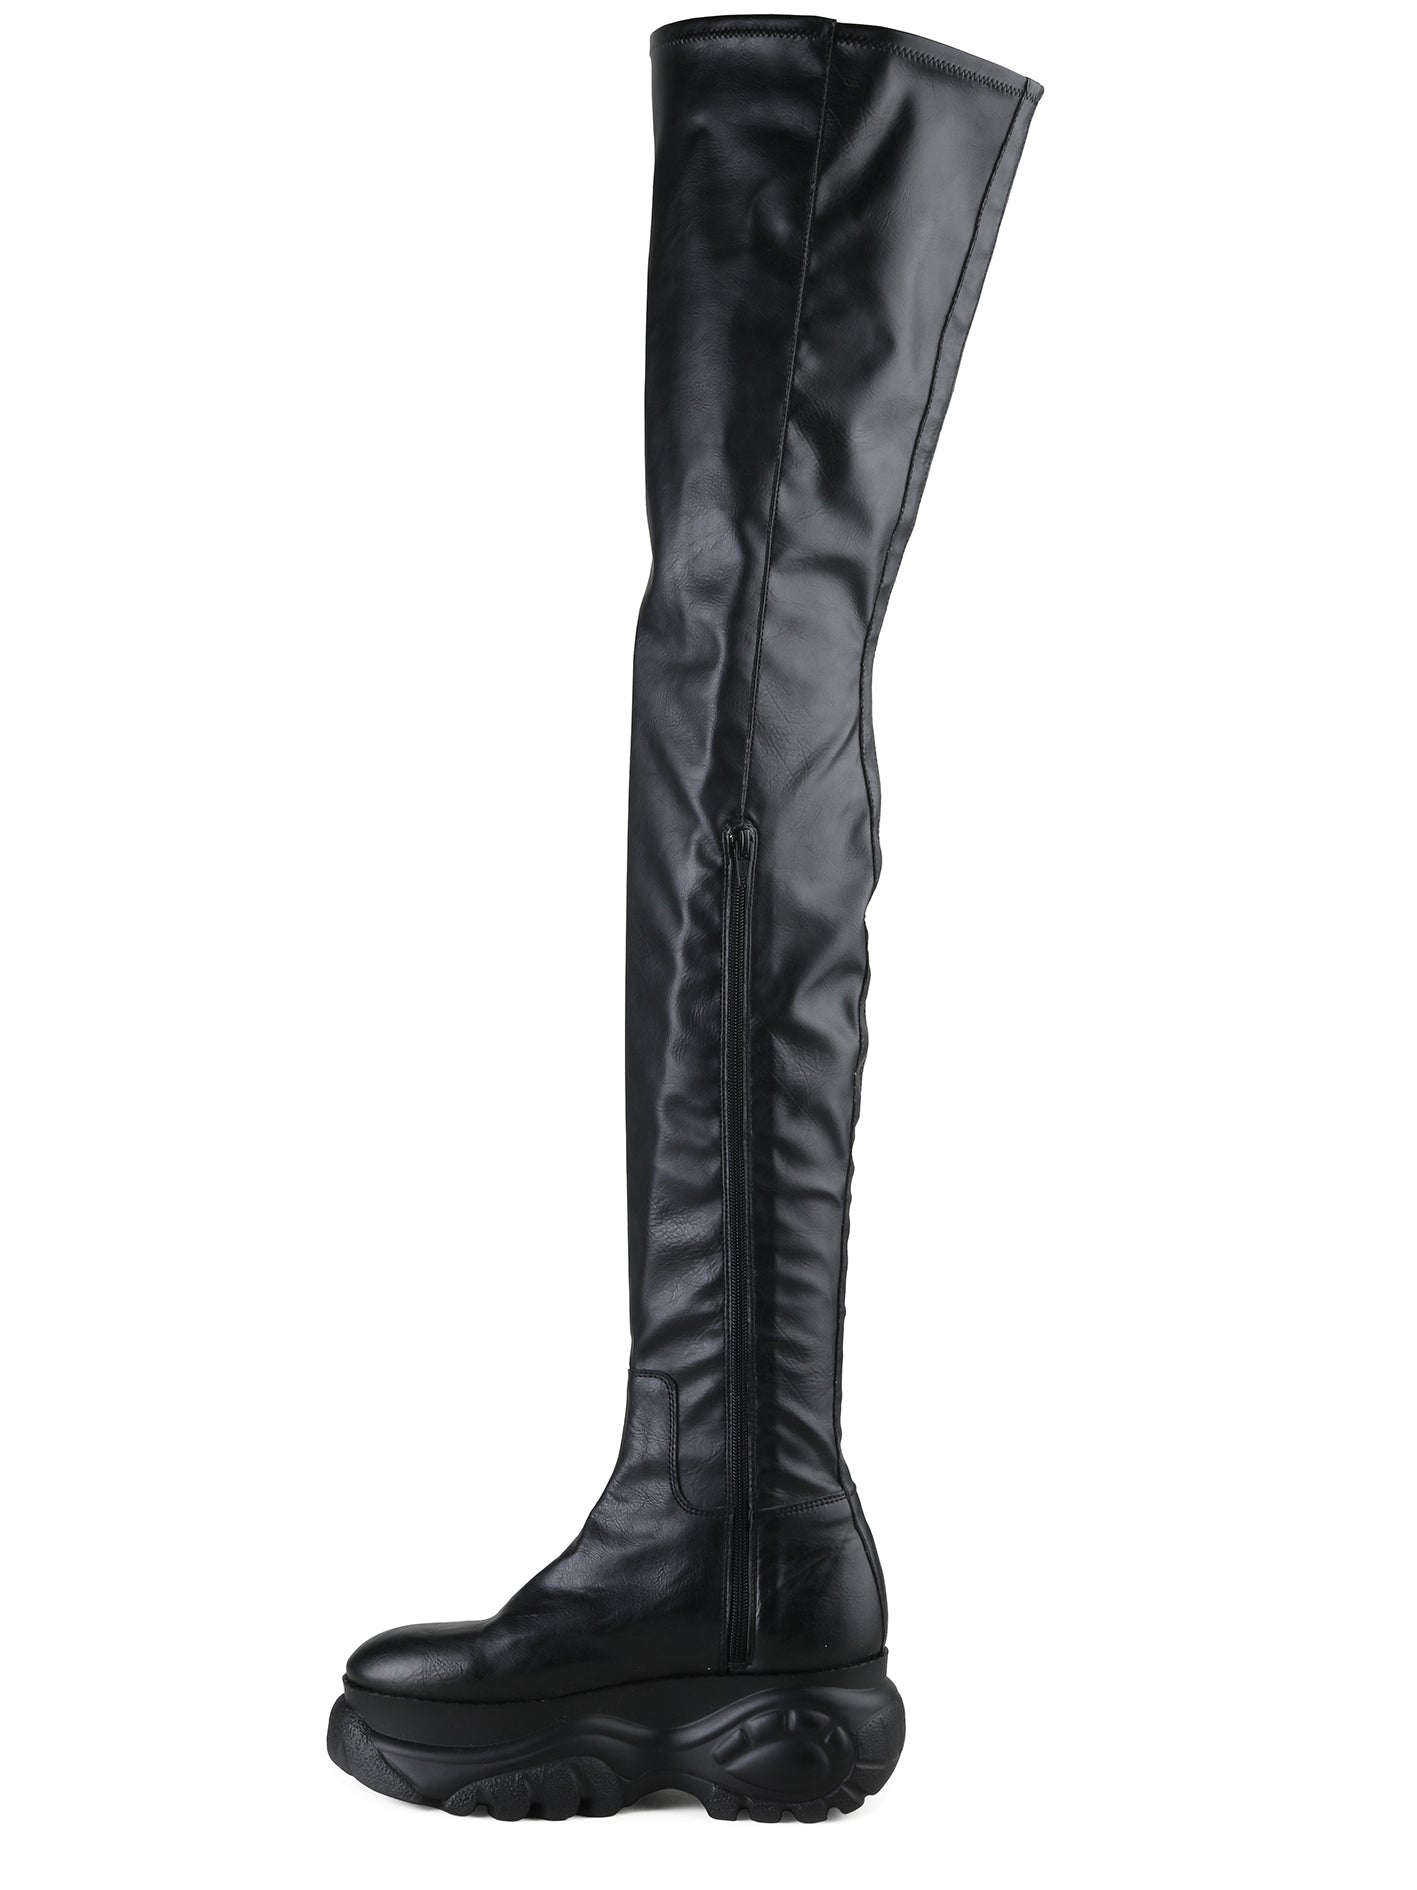 Buffalo by 032c Over The Knee Boot 